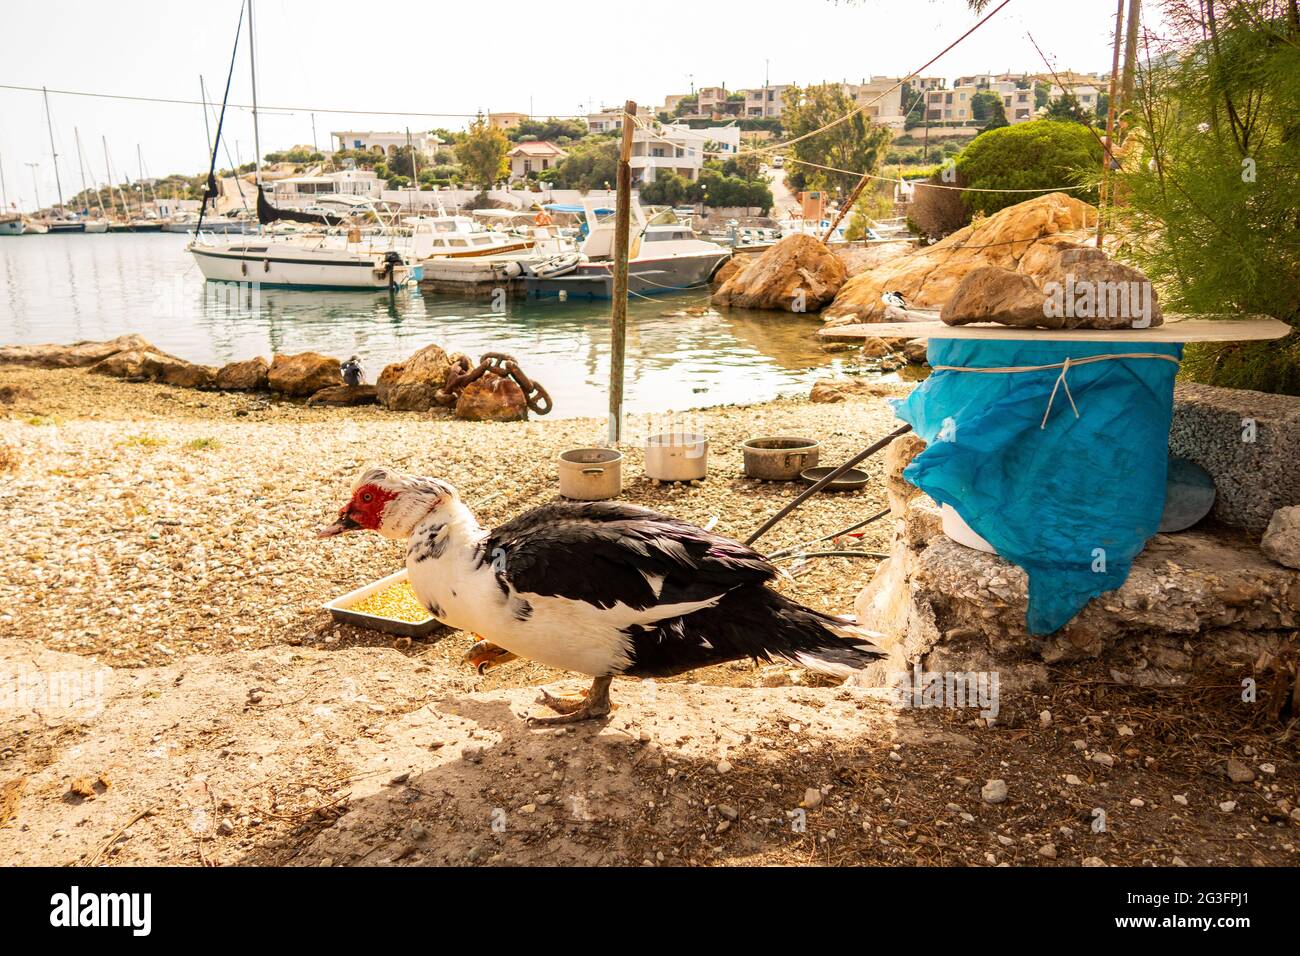 Wild black and white muscovy duck with a red head standing on pier in Finikas Marina, Greece, with boats in the background. Stock Photo